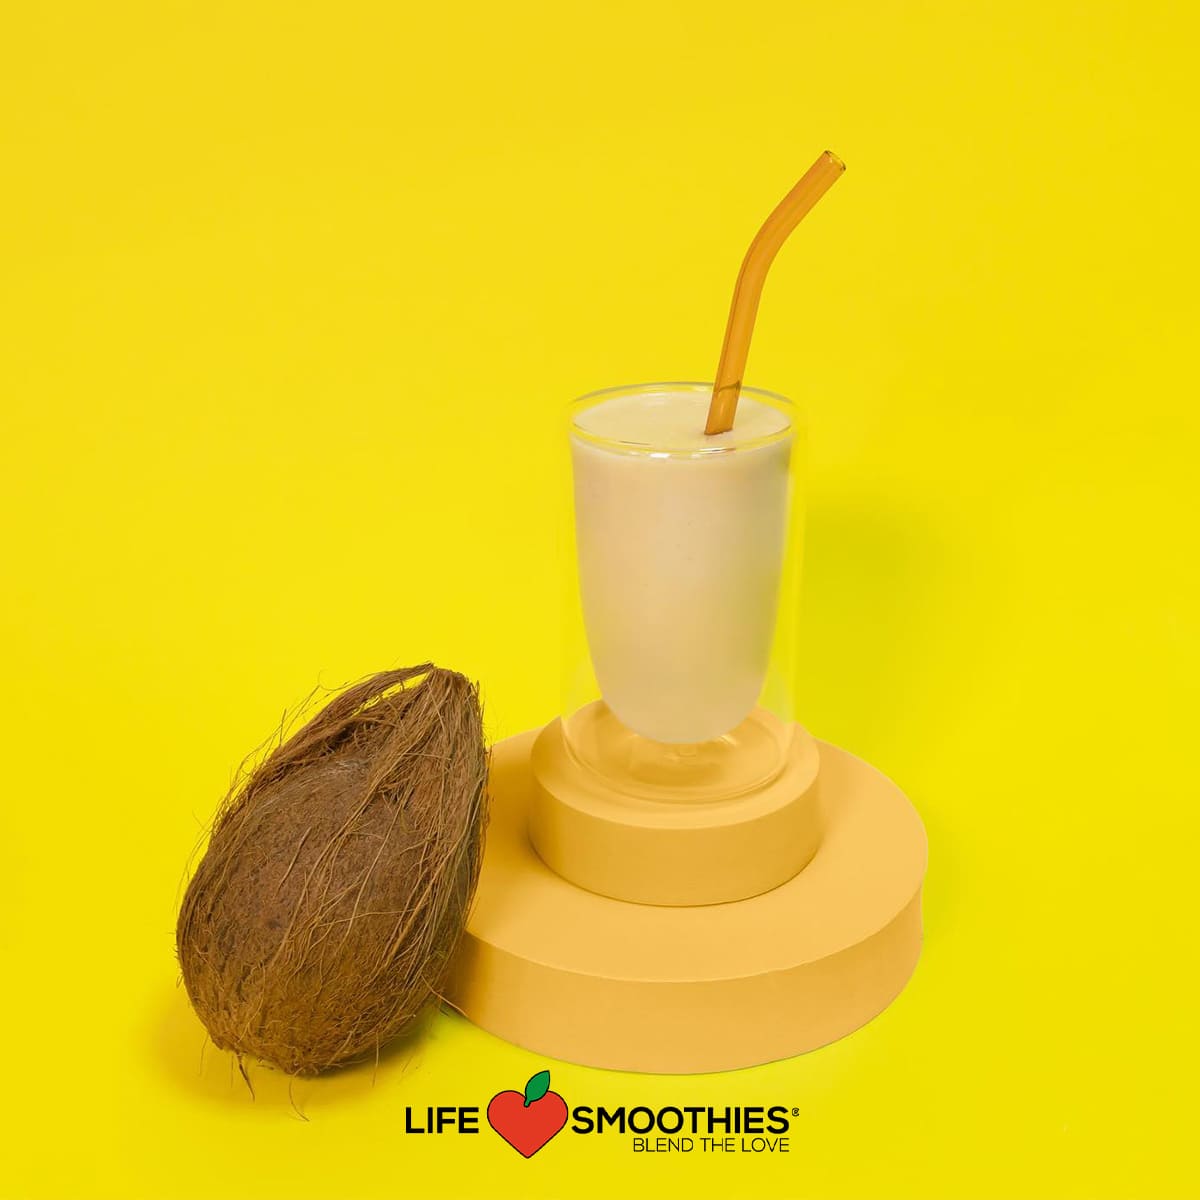 Coconut, the tropical treasure Life Smoothies